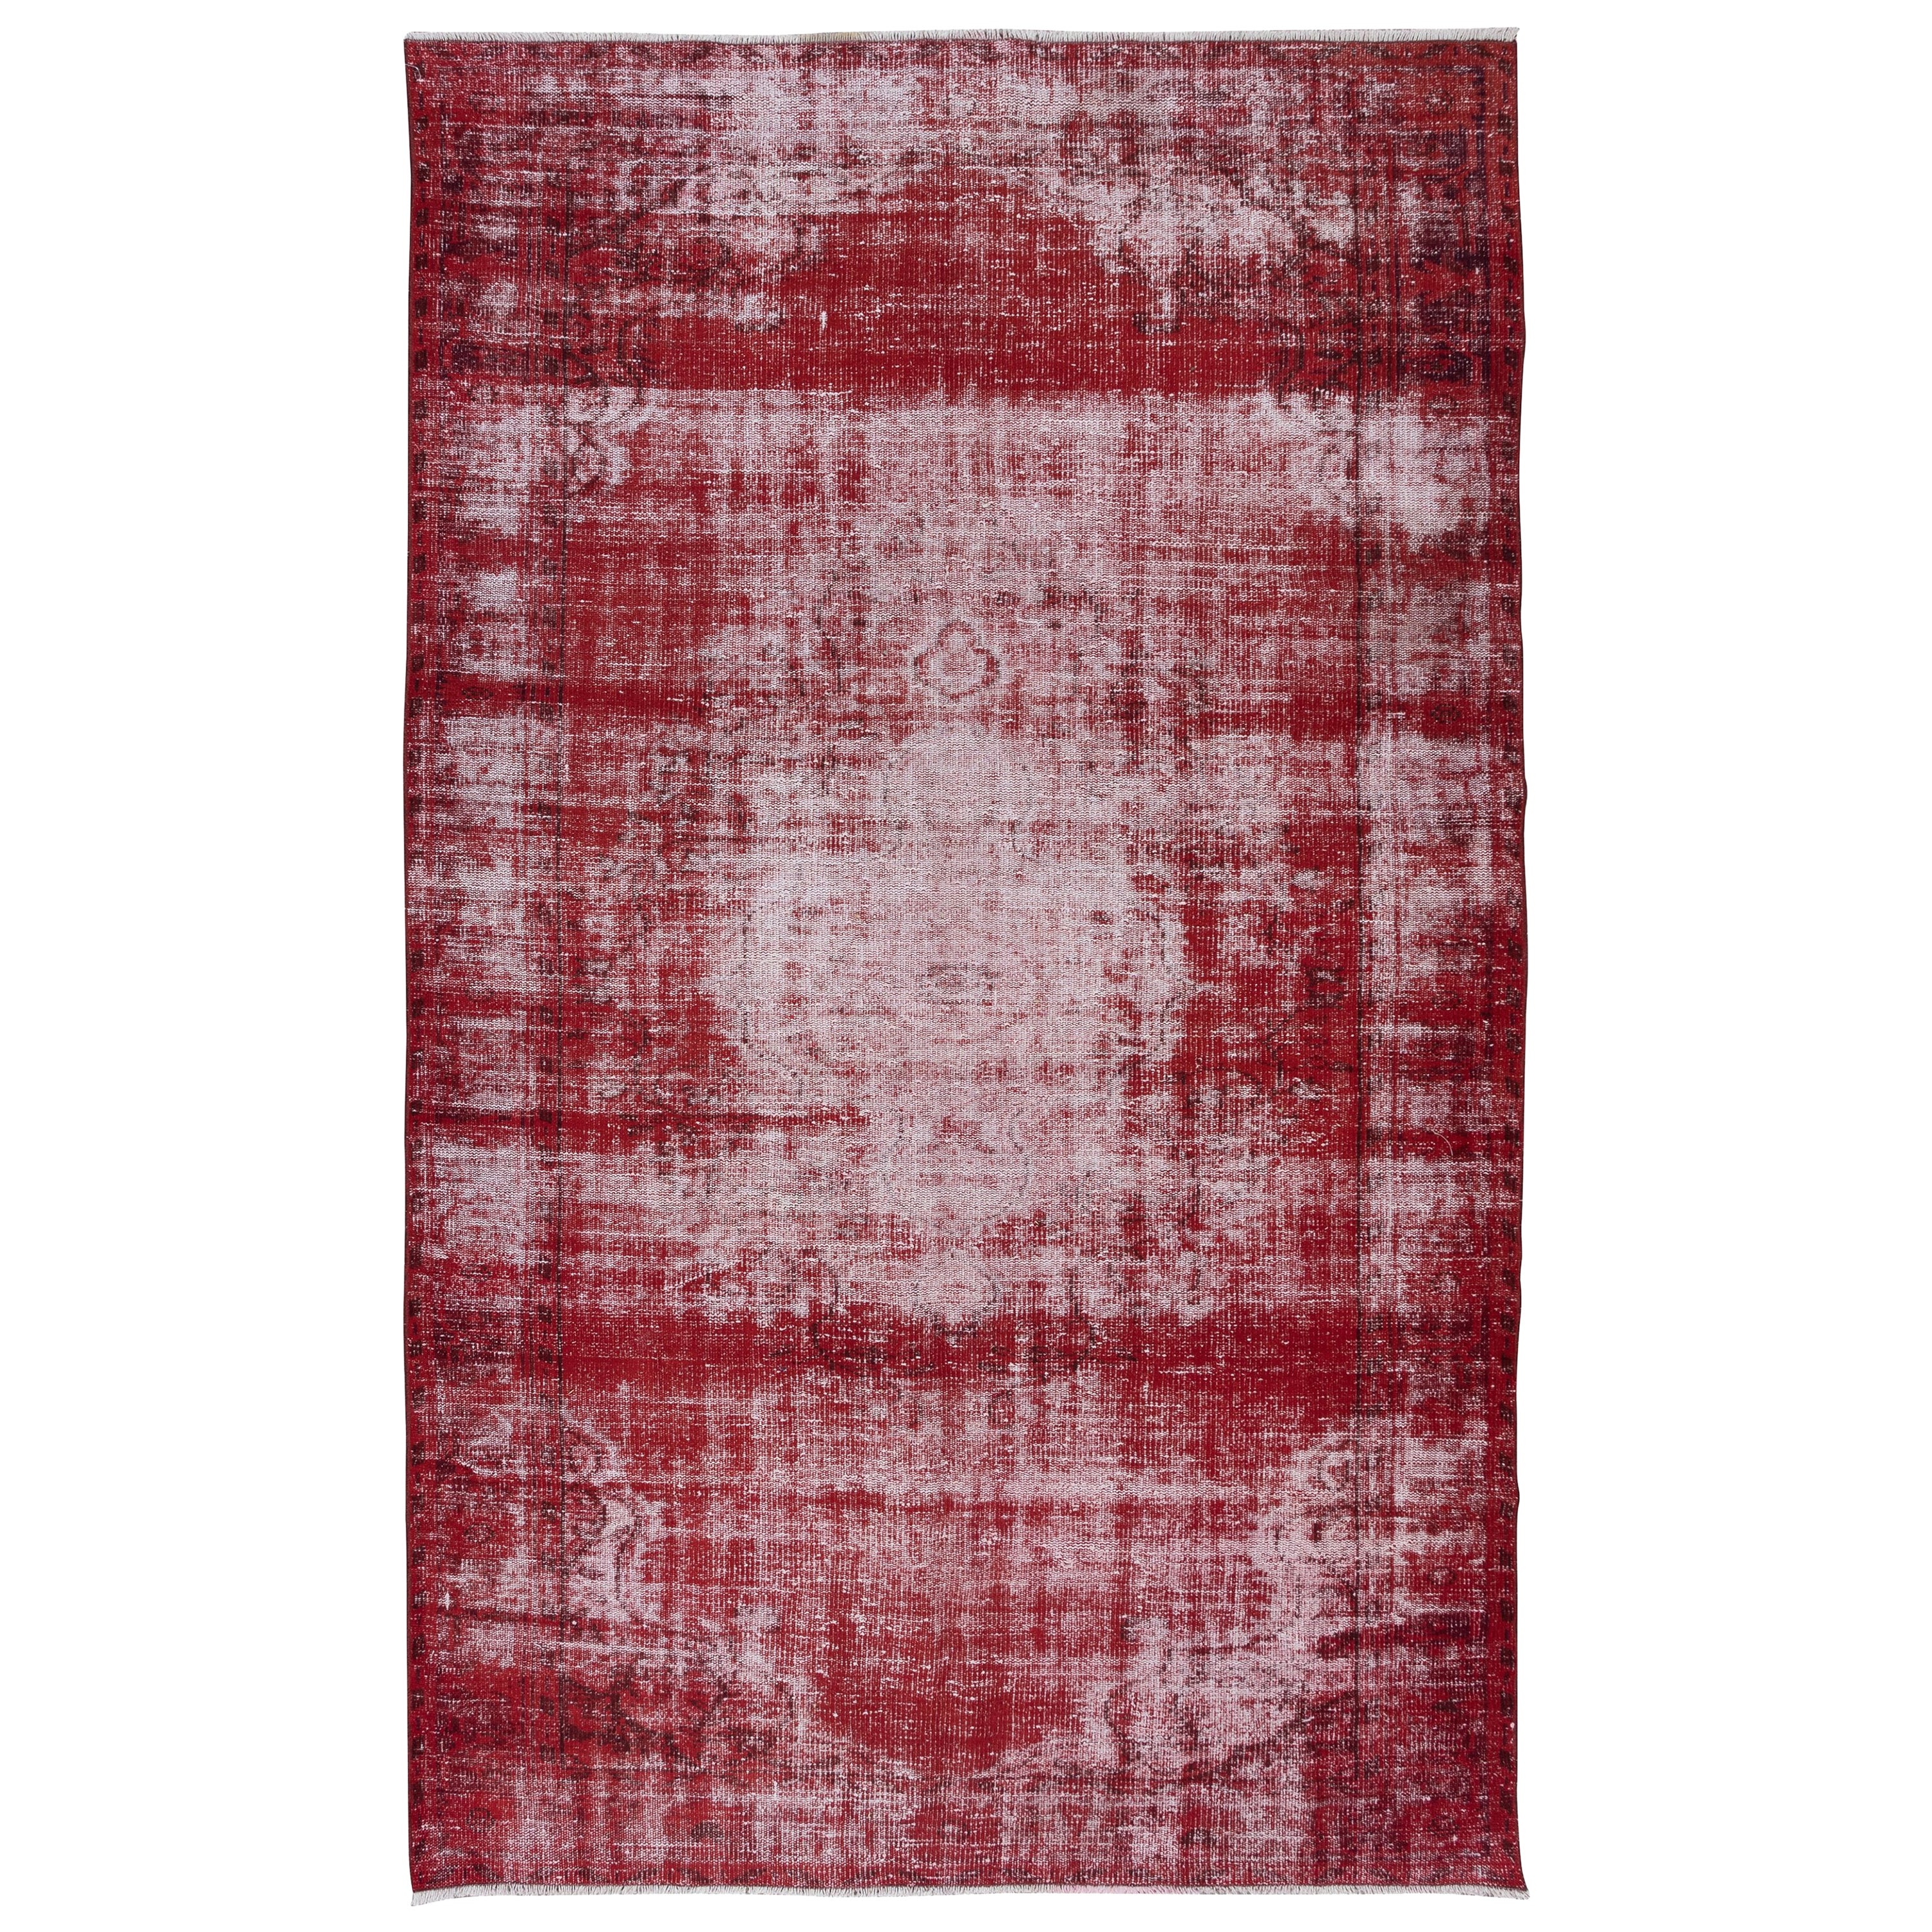 6x10 Ft Shabby Chic Turkish Red Area Rug, Vintage Handmade Distressed Carpet For Sale